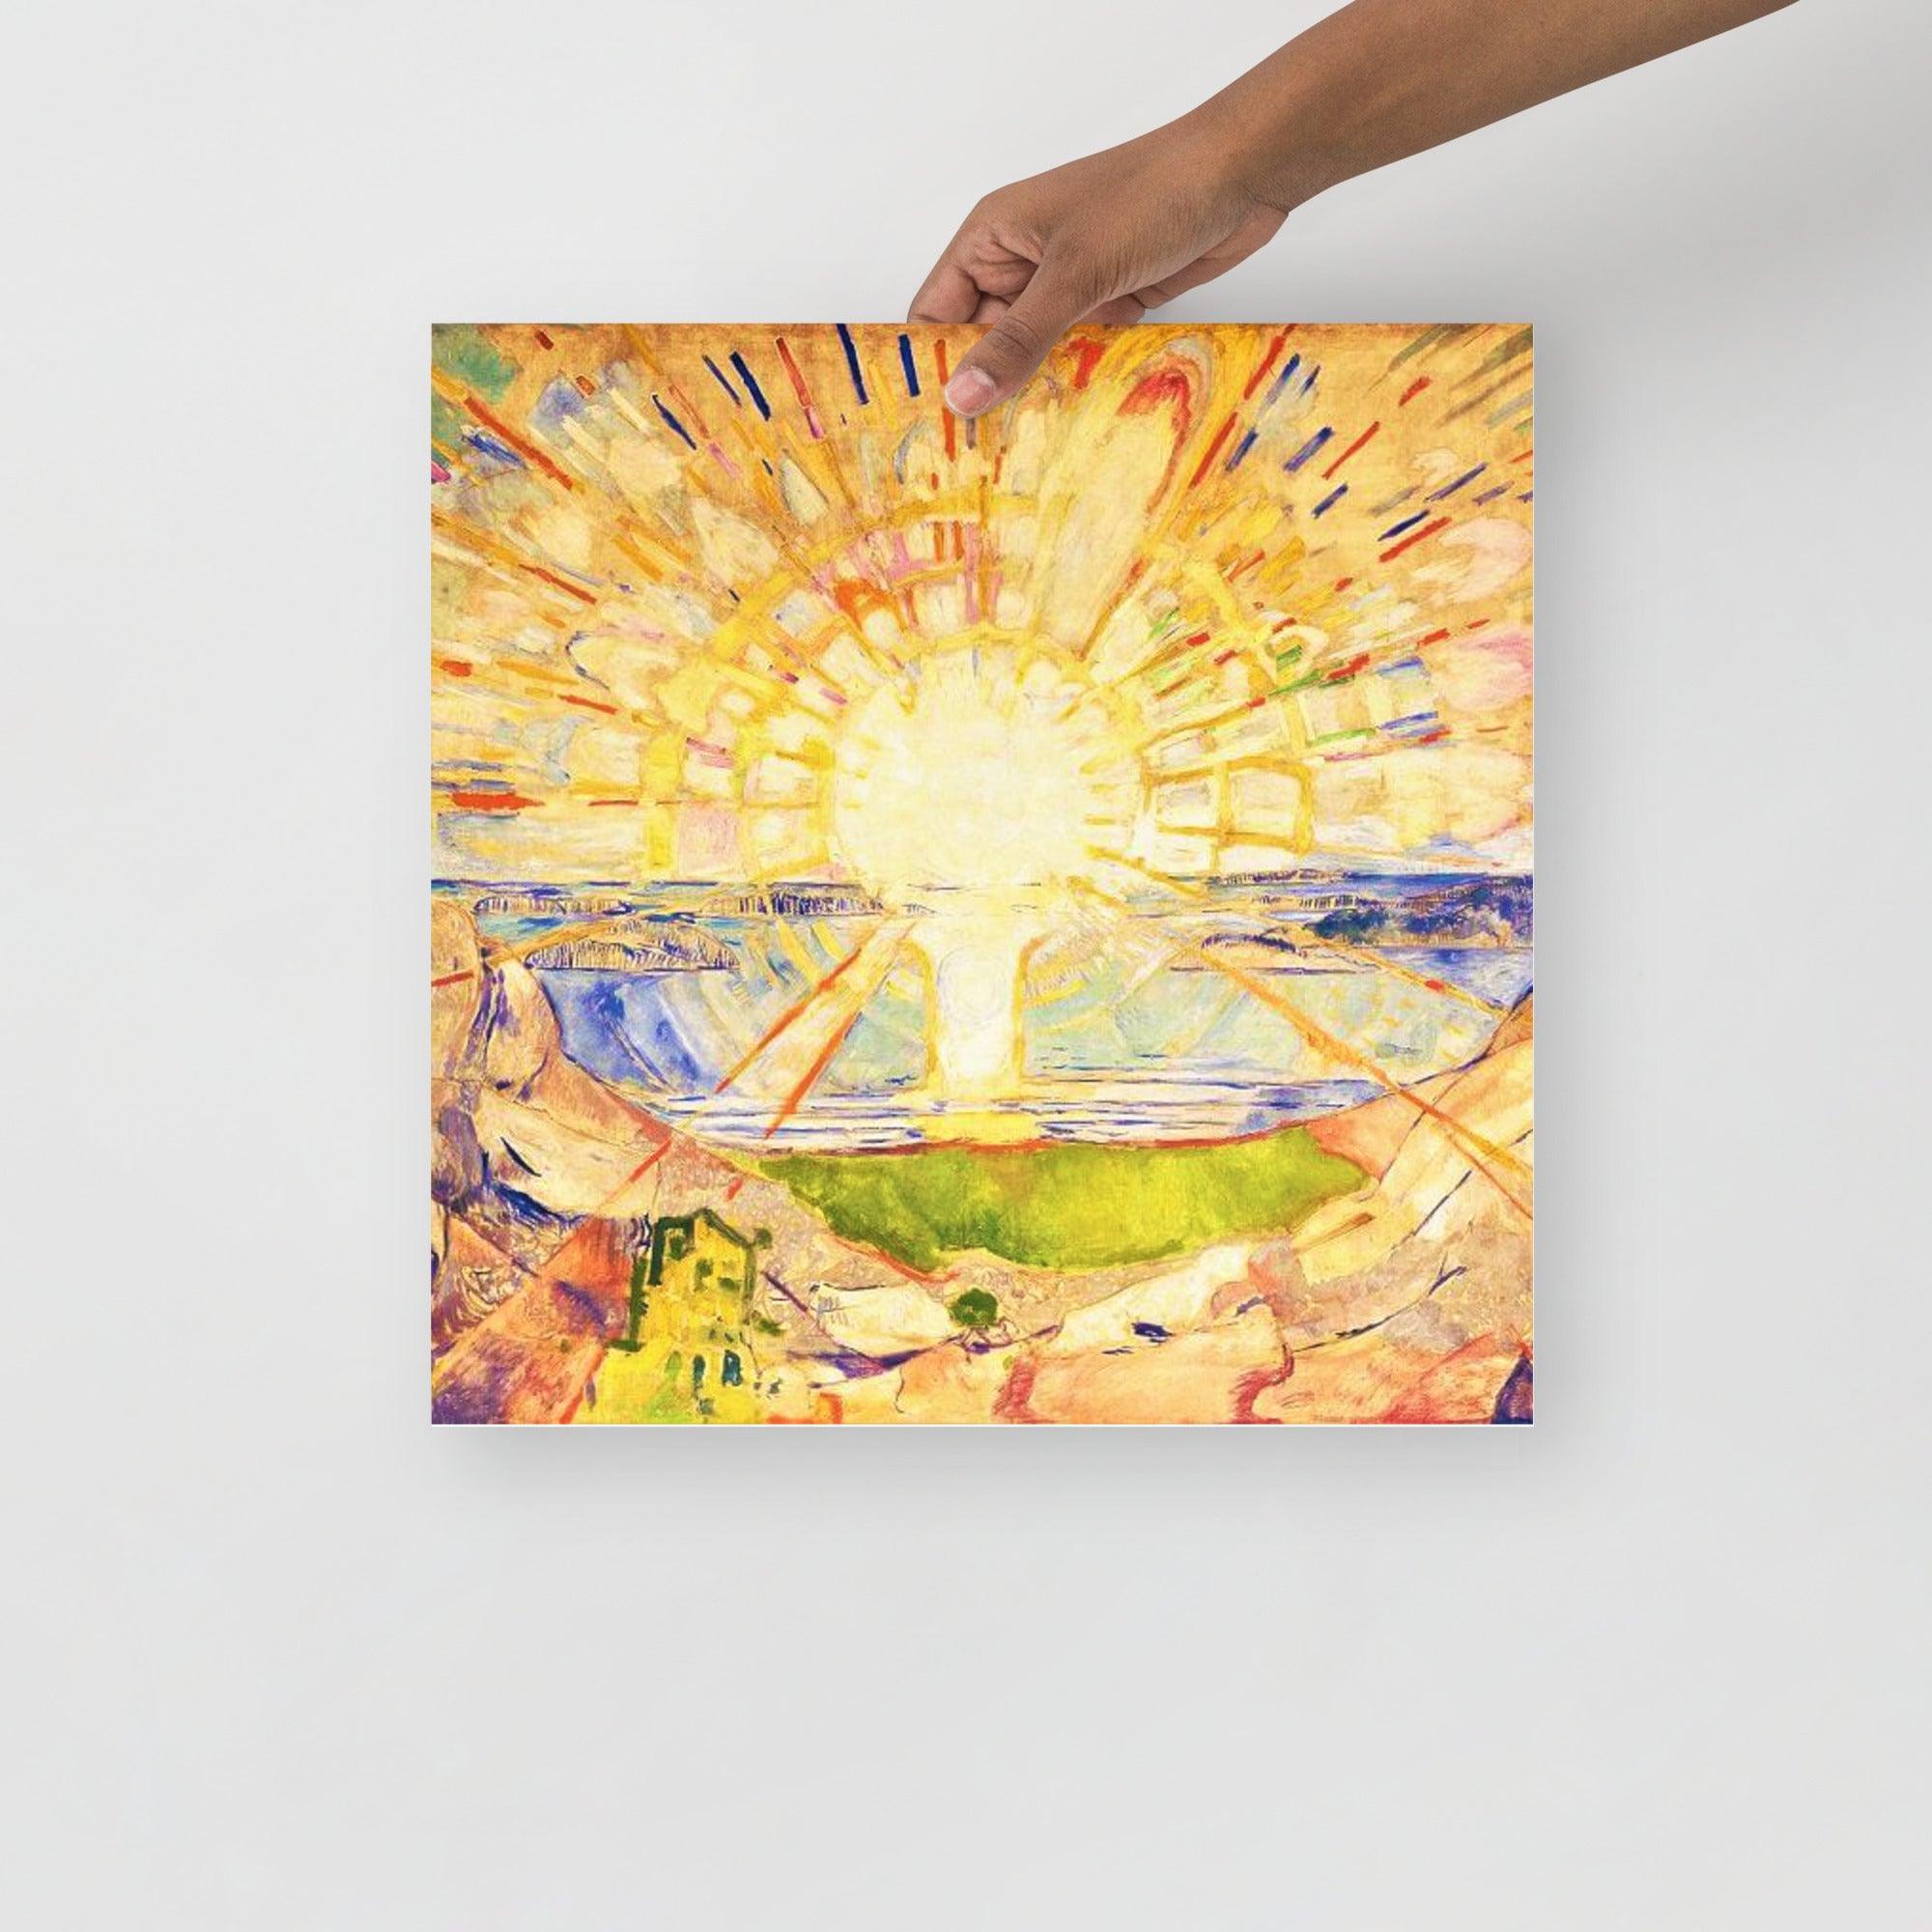 The Sun By Edvard Munch poster on a plain backdrop in size 16x16”.